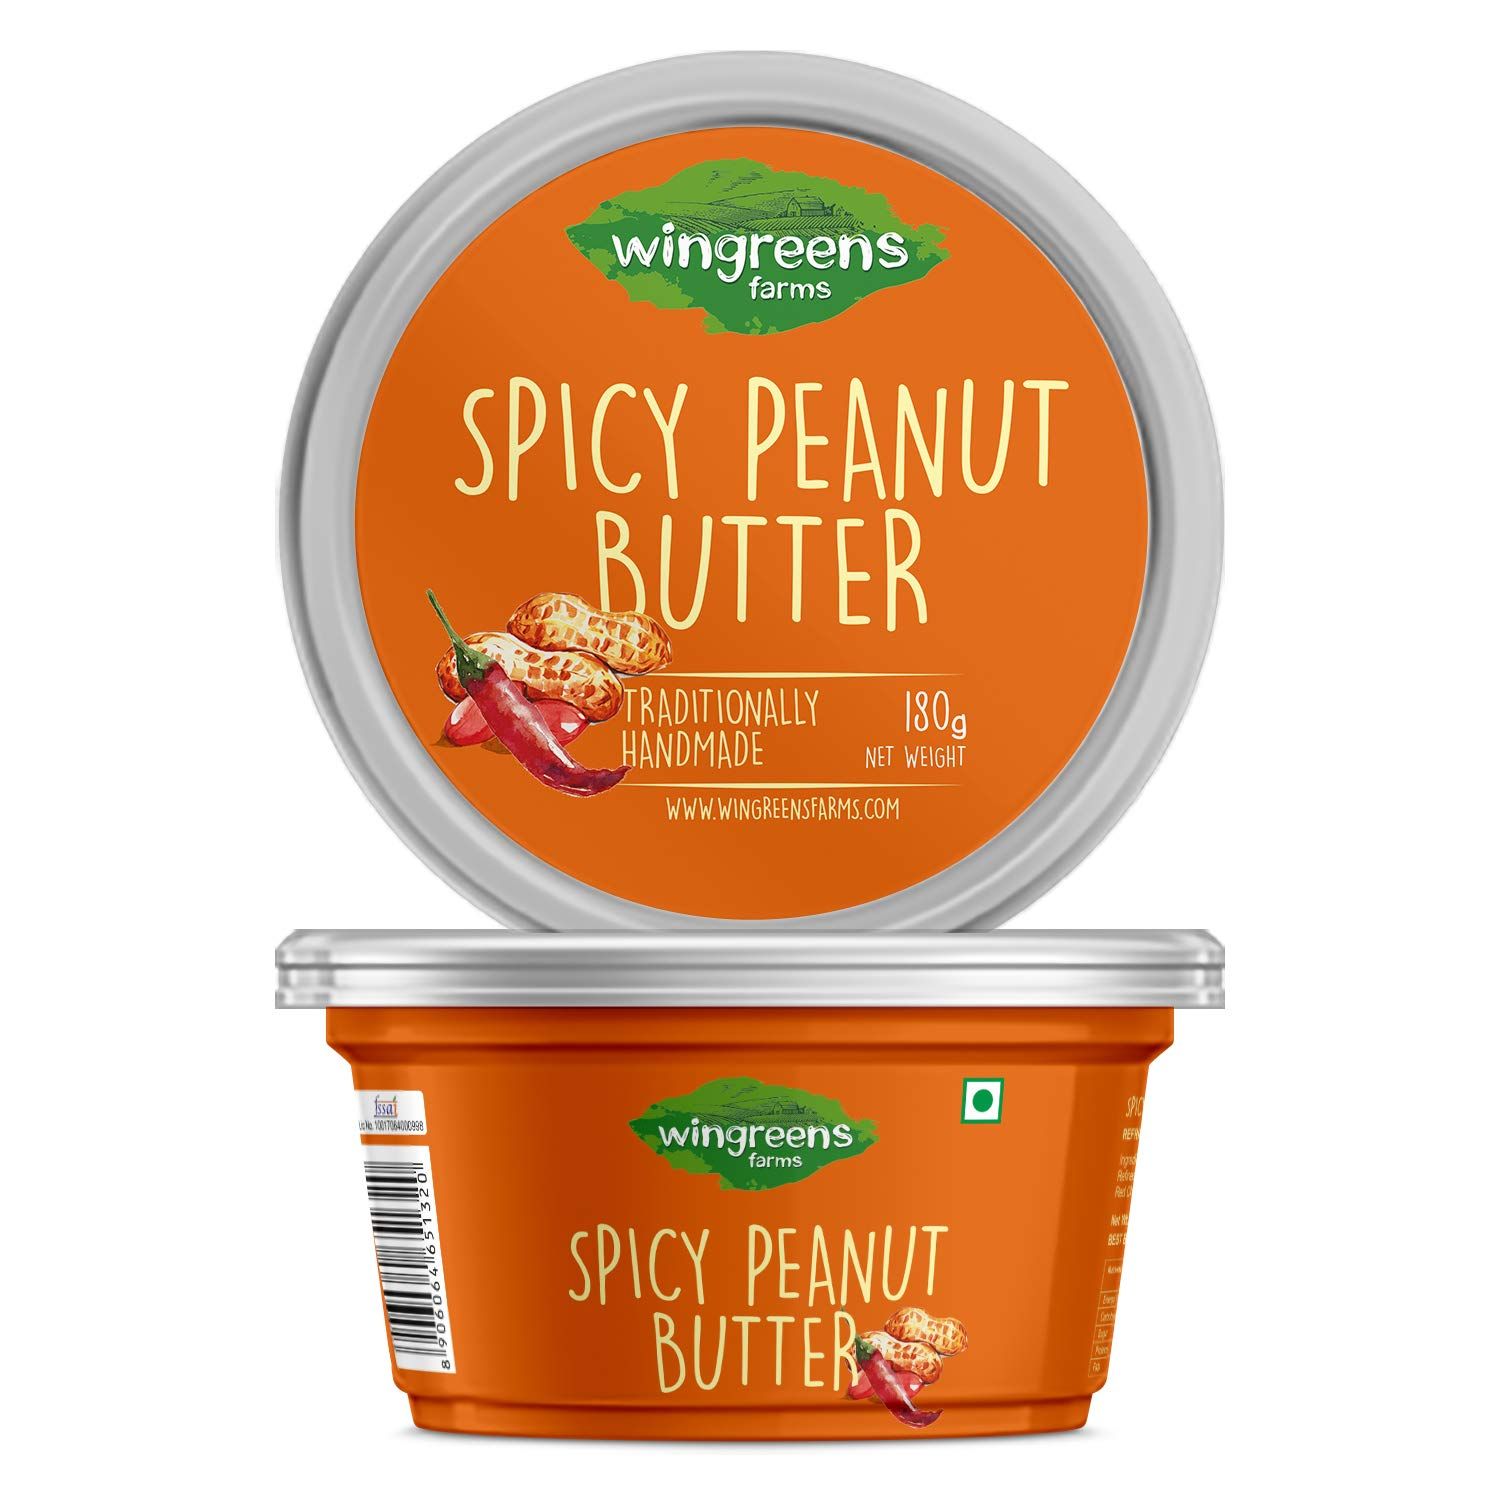 Wingreens Farms Spicy Peanut Butter Image